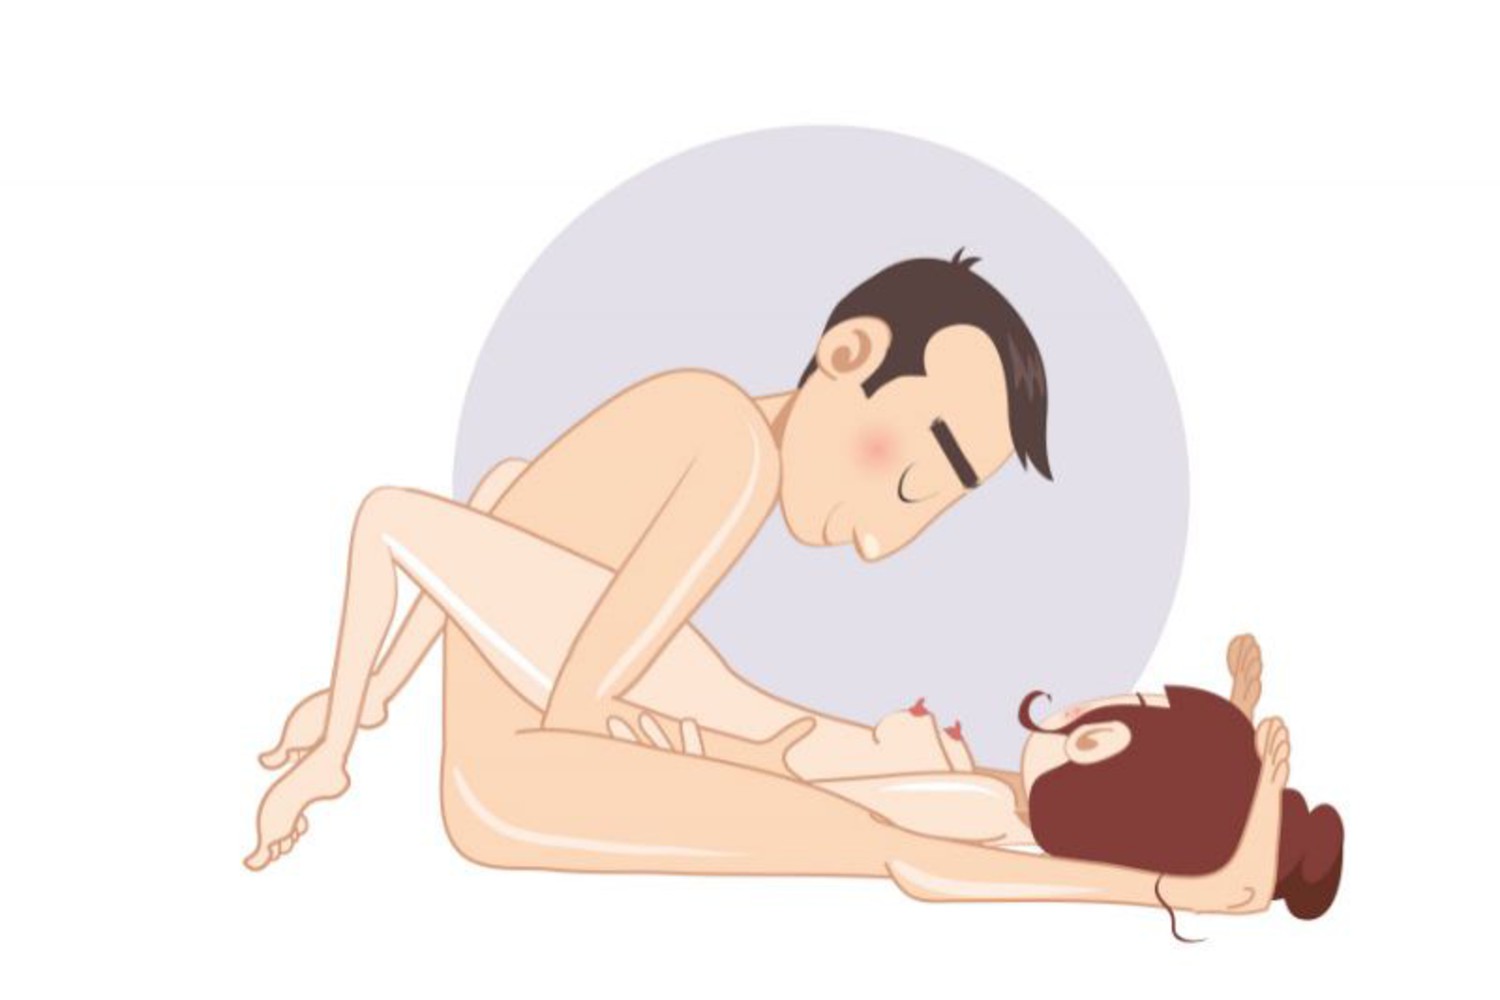 The Glowing Juniper Sex Position